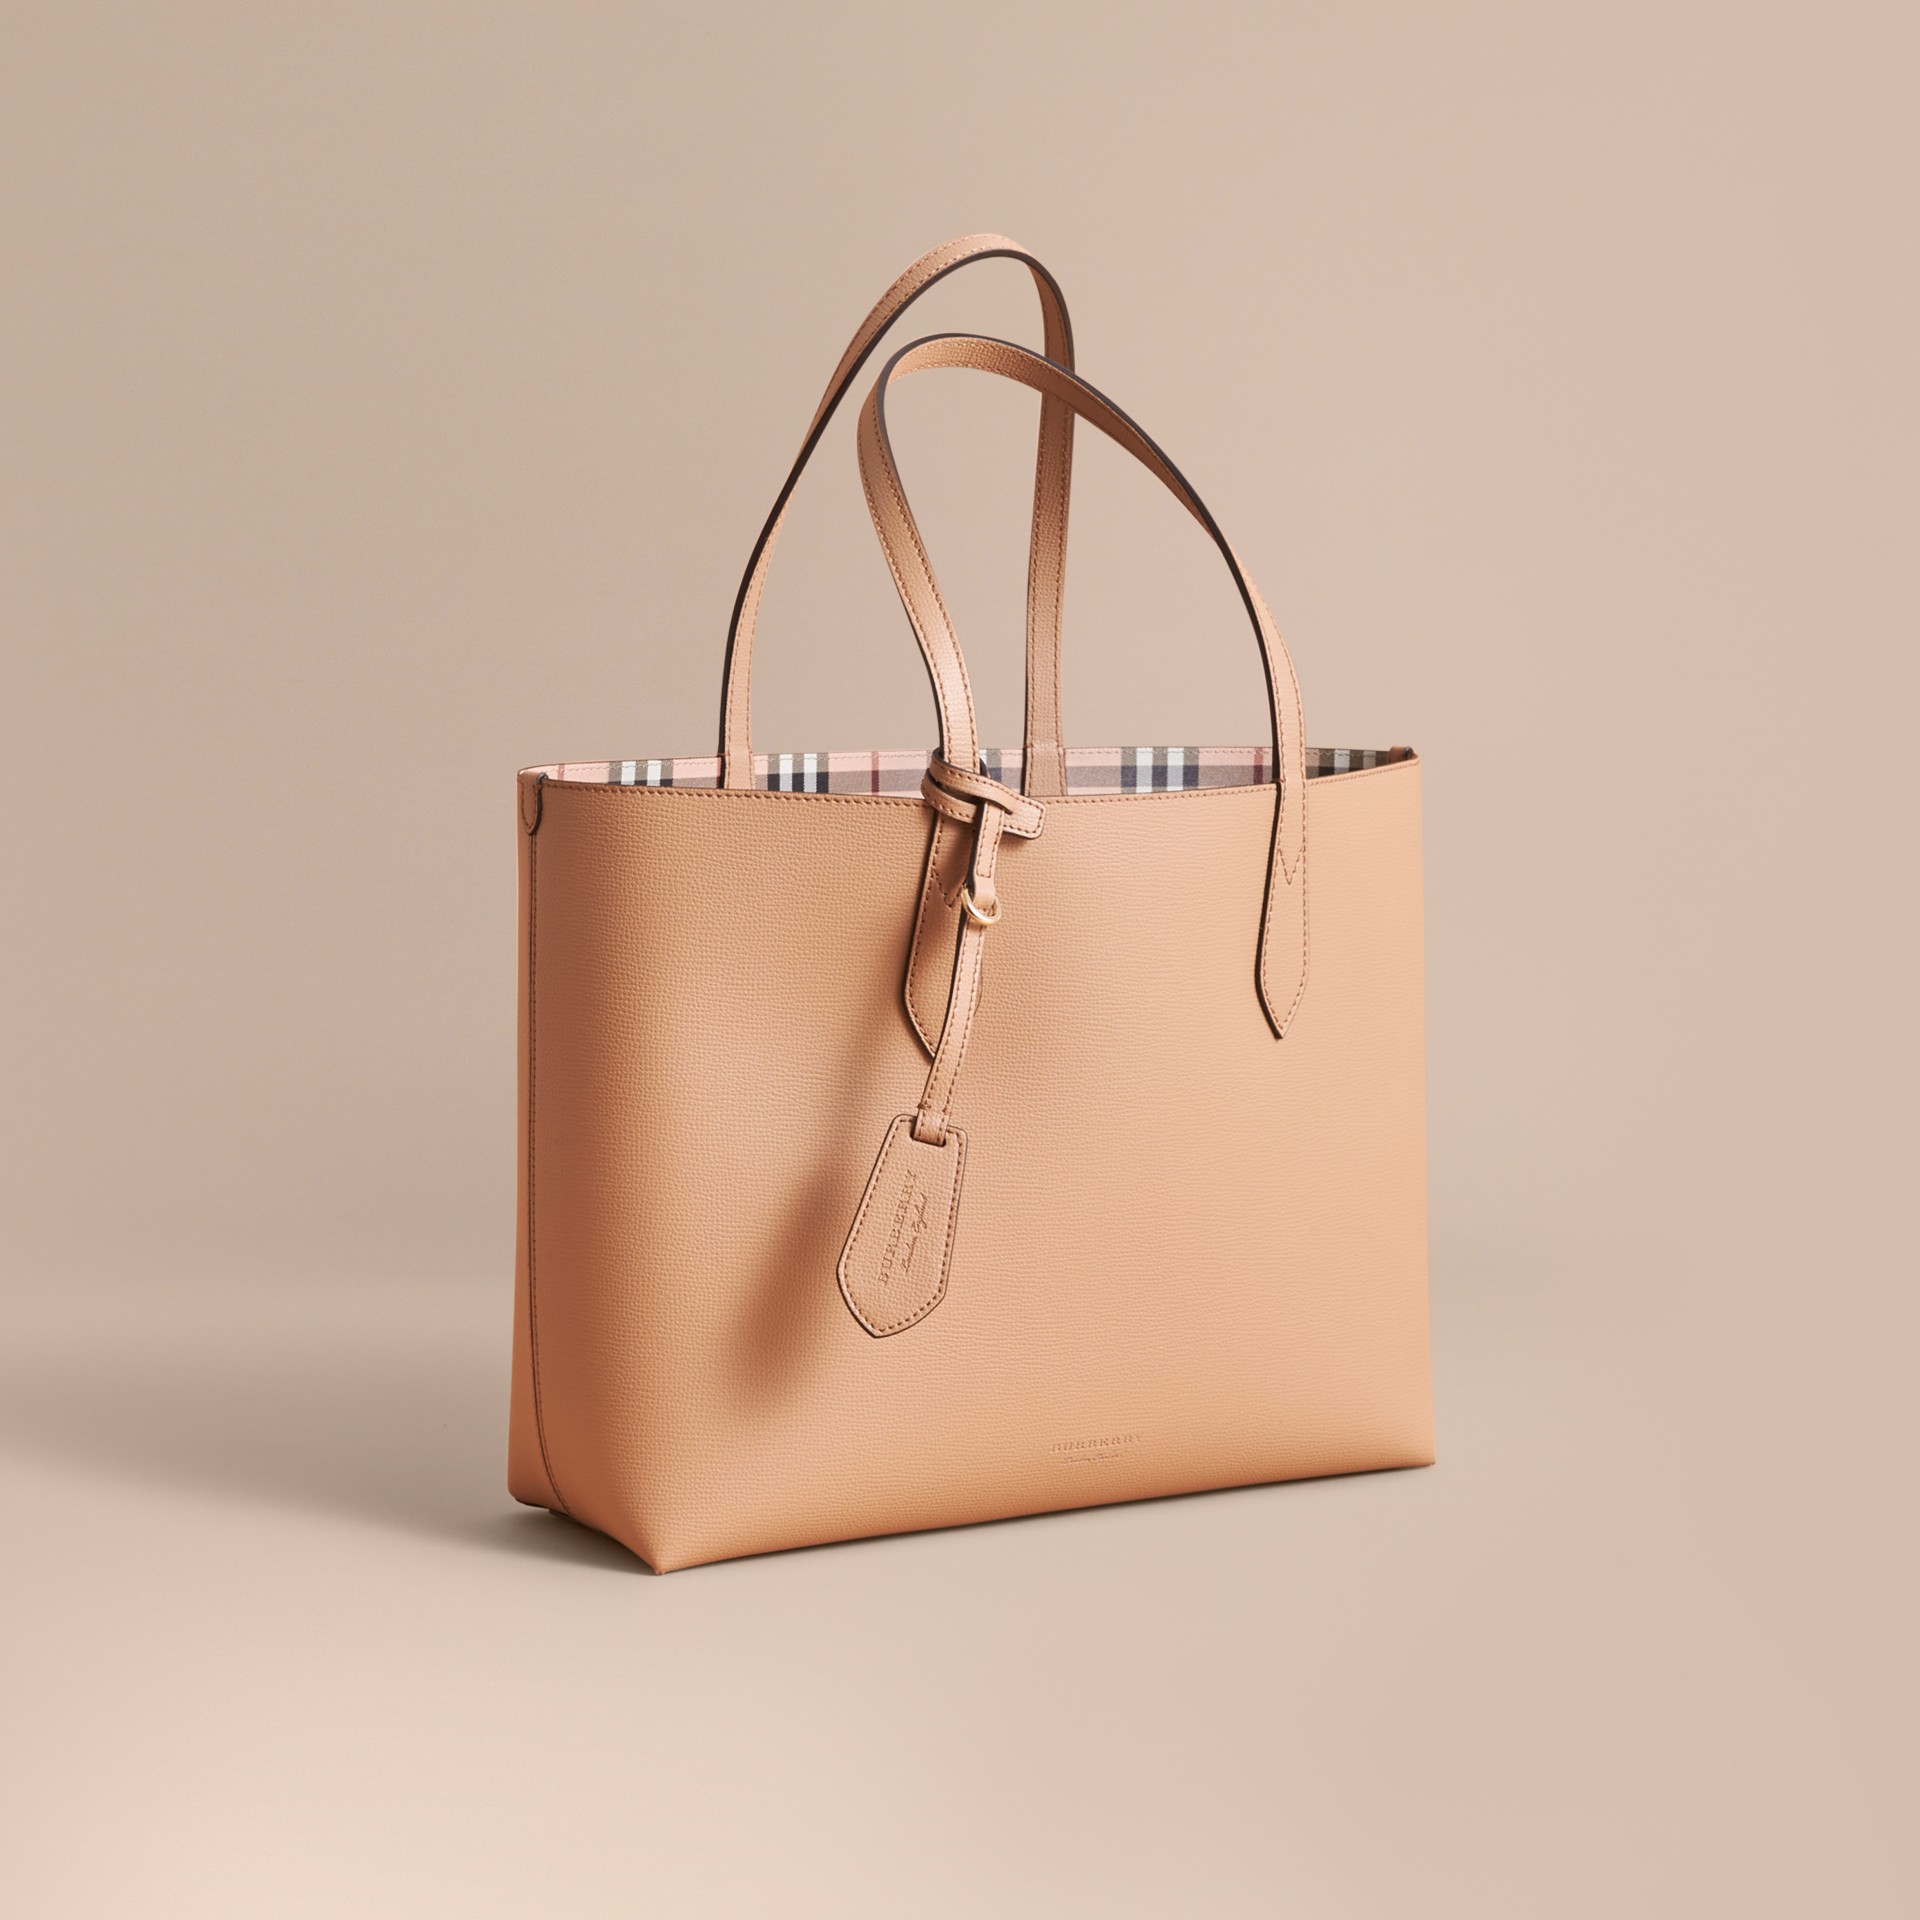 The Medium Reversible Tote in Haymarket Check and Leather in Mid Camel - Women | Burberry United 